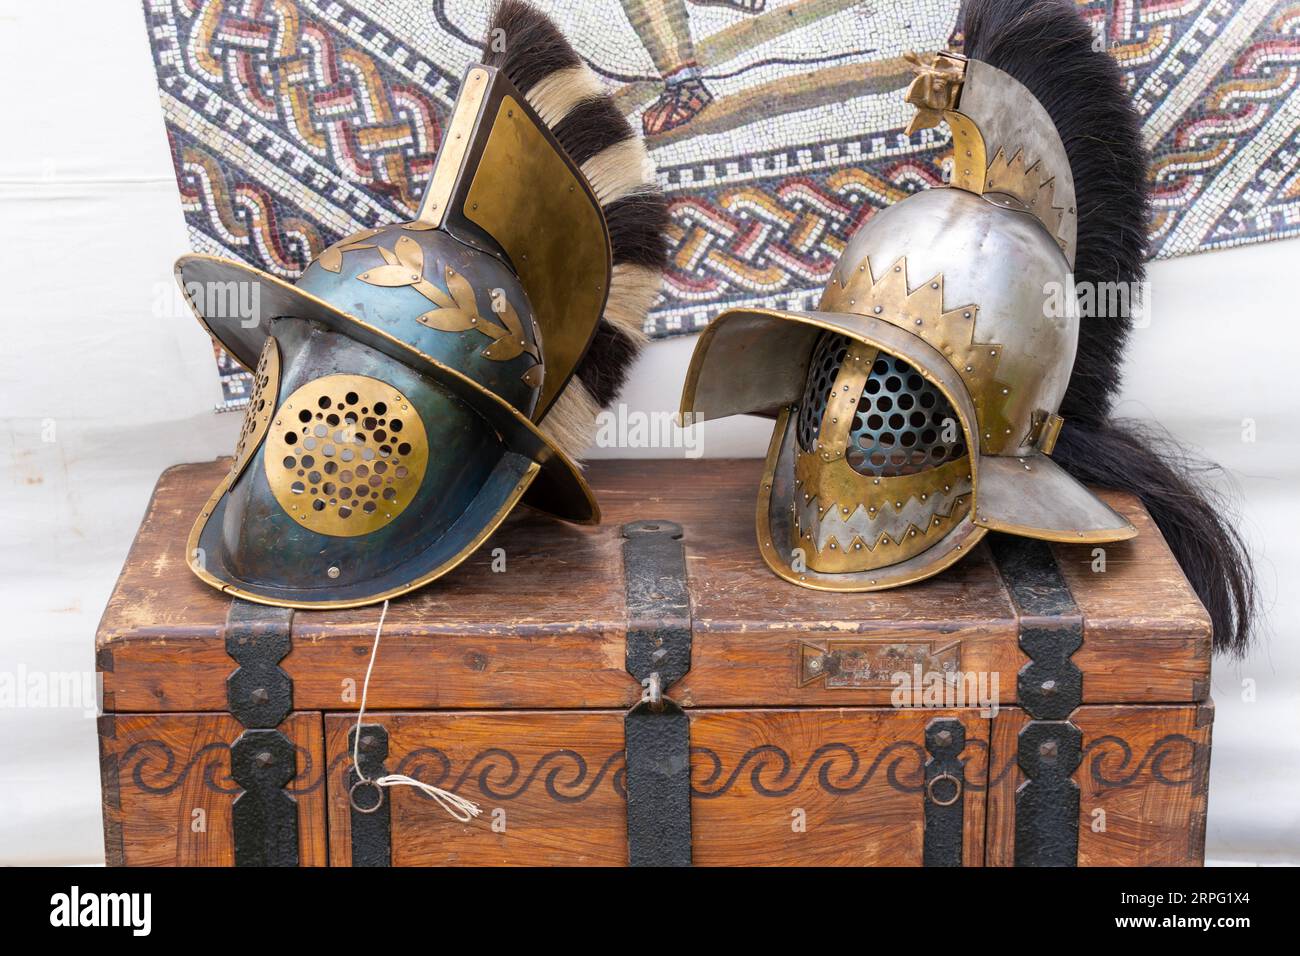 2 ancient roman gladiator helmets on a brown wooden chest with a mosaic image in the background Stock Photo